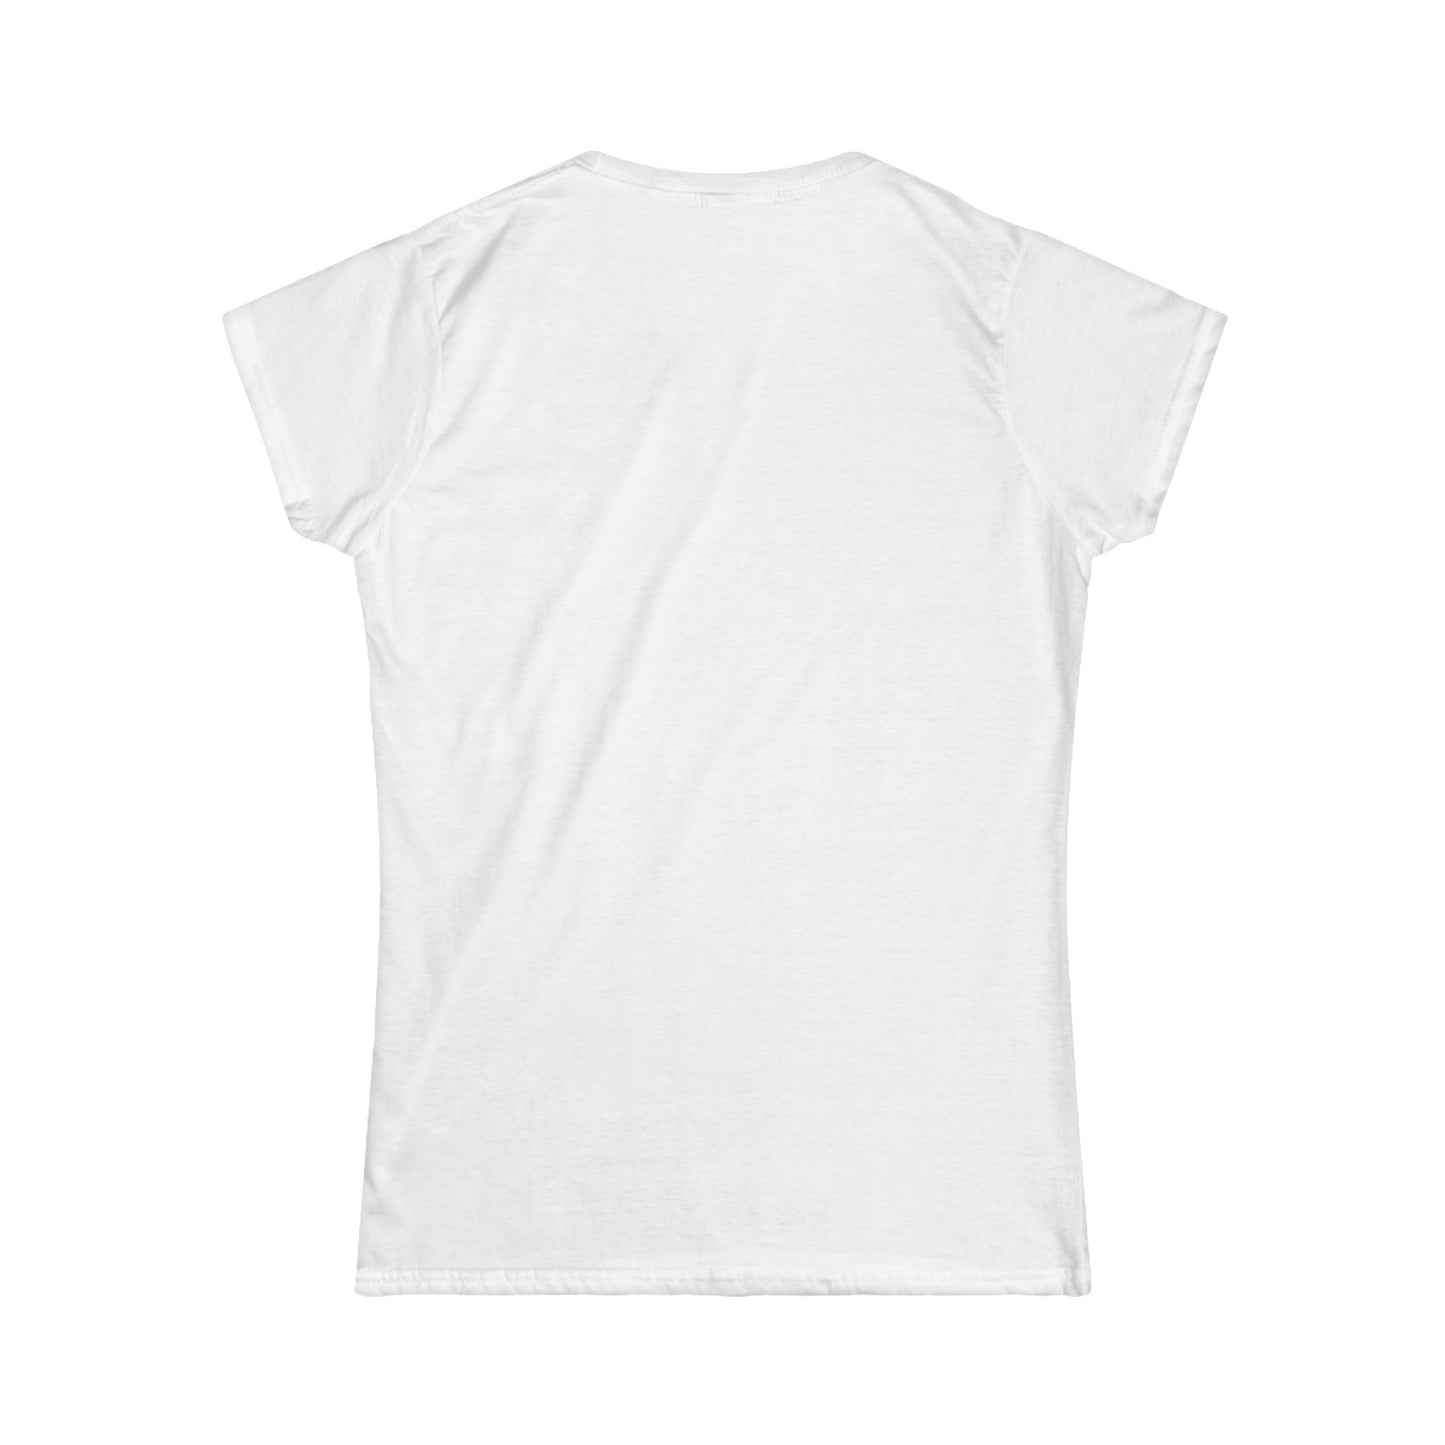 Women's Softstyle Tee "D"